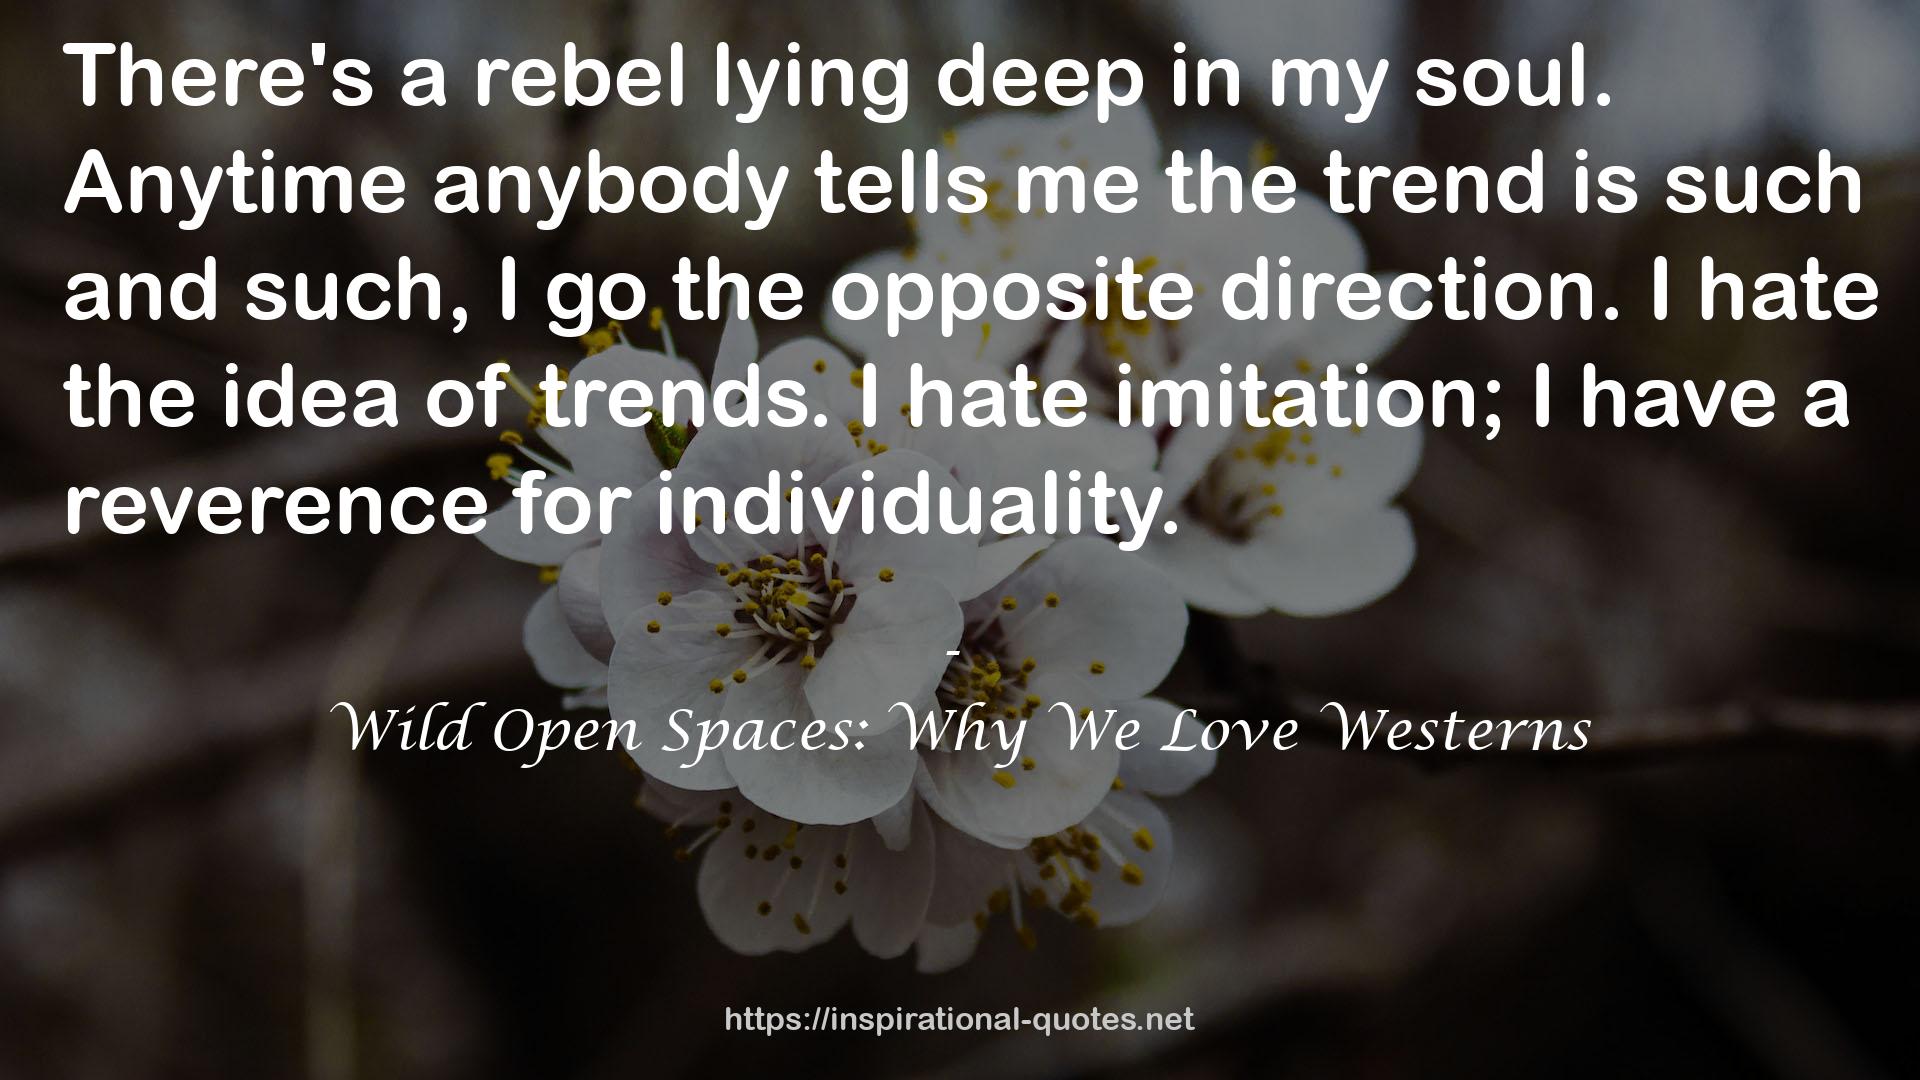 Wild Open Spaces: Why We Love Westerns QUOTES